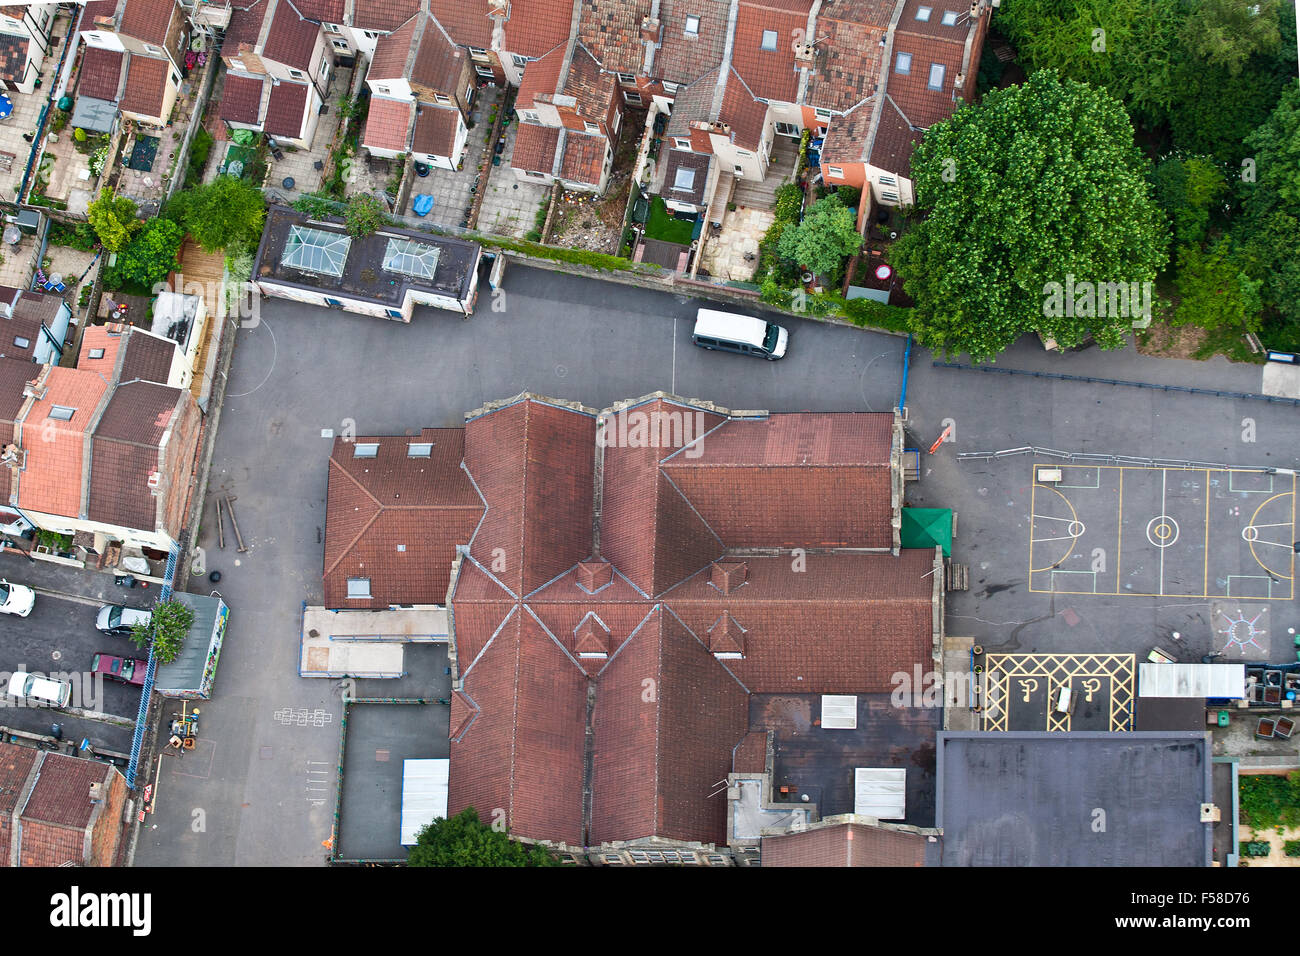 Aerial views of houses Stock Photo